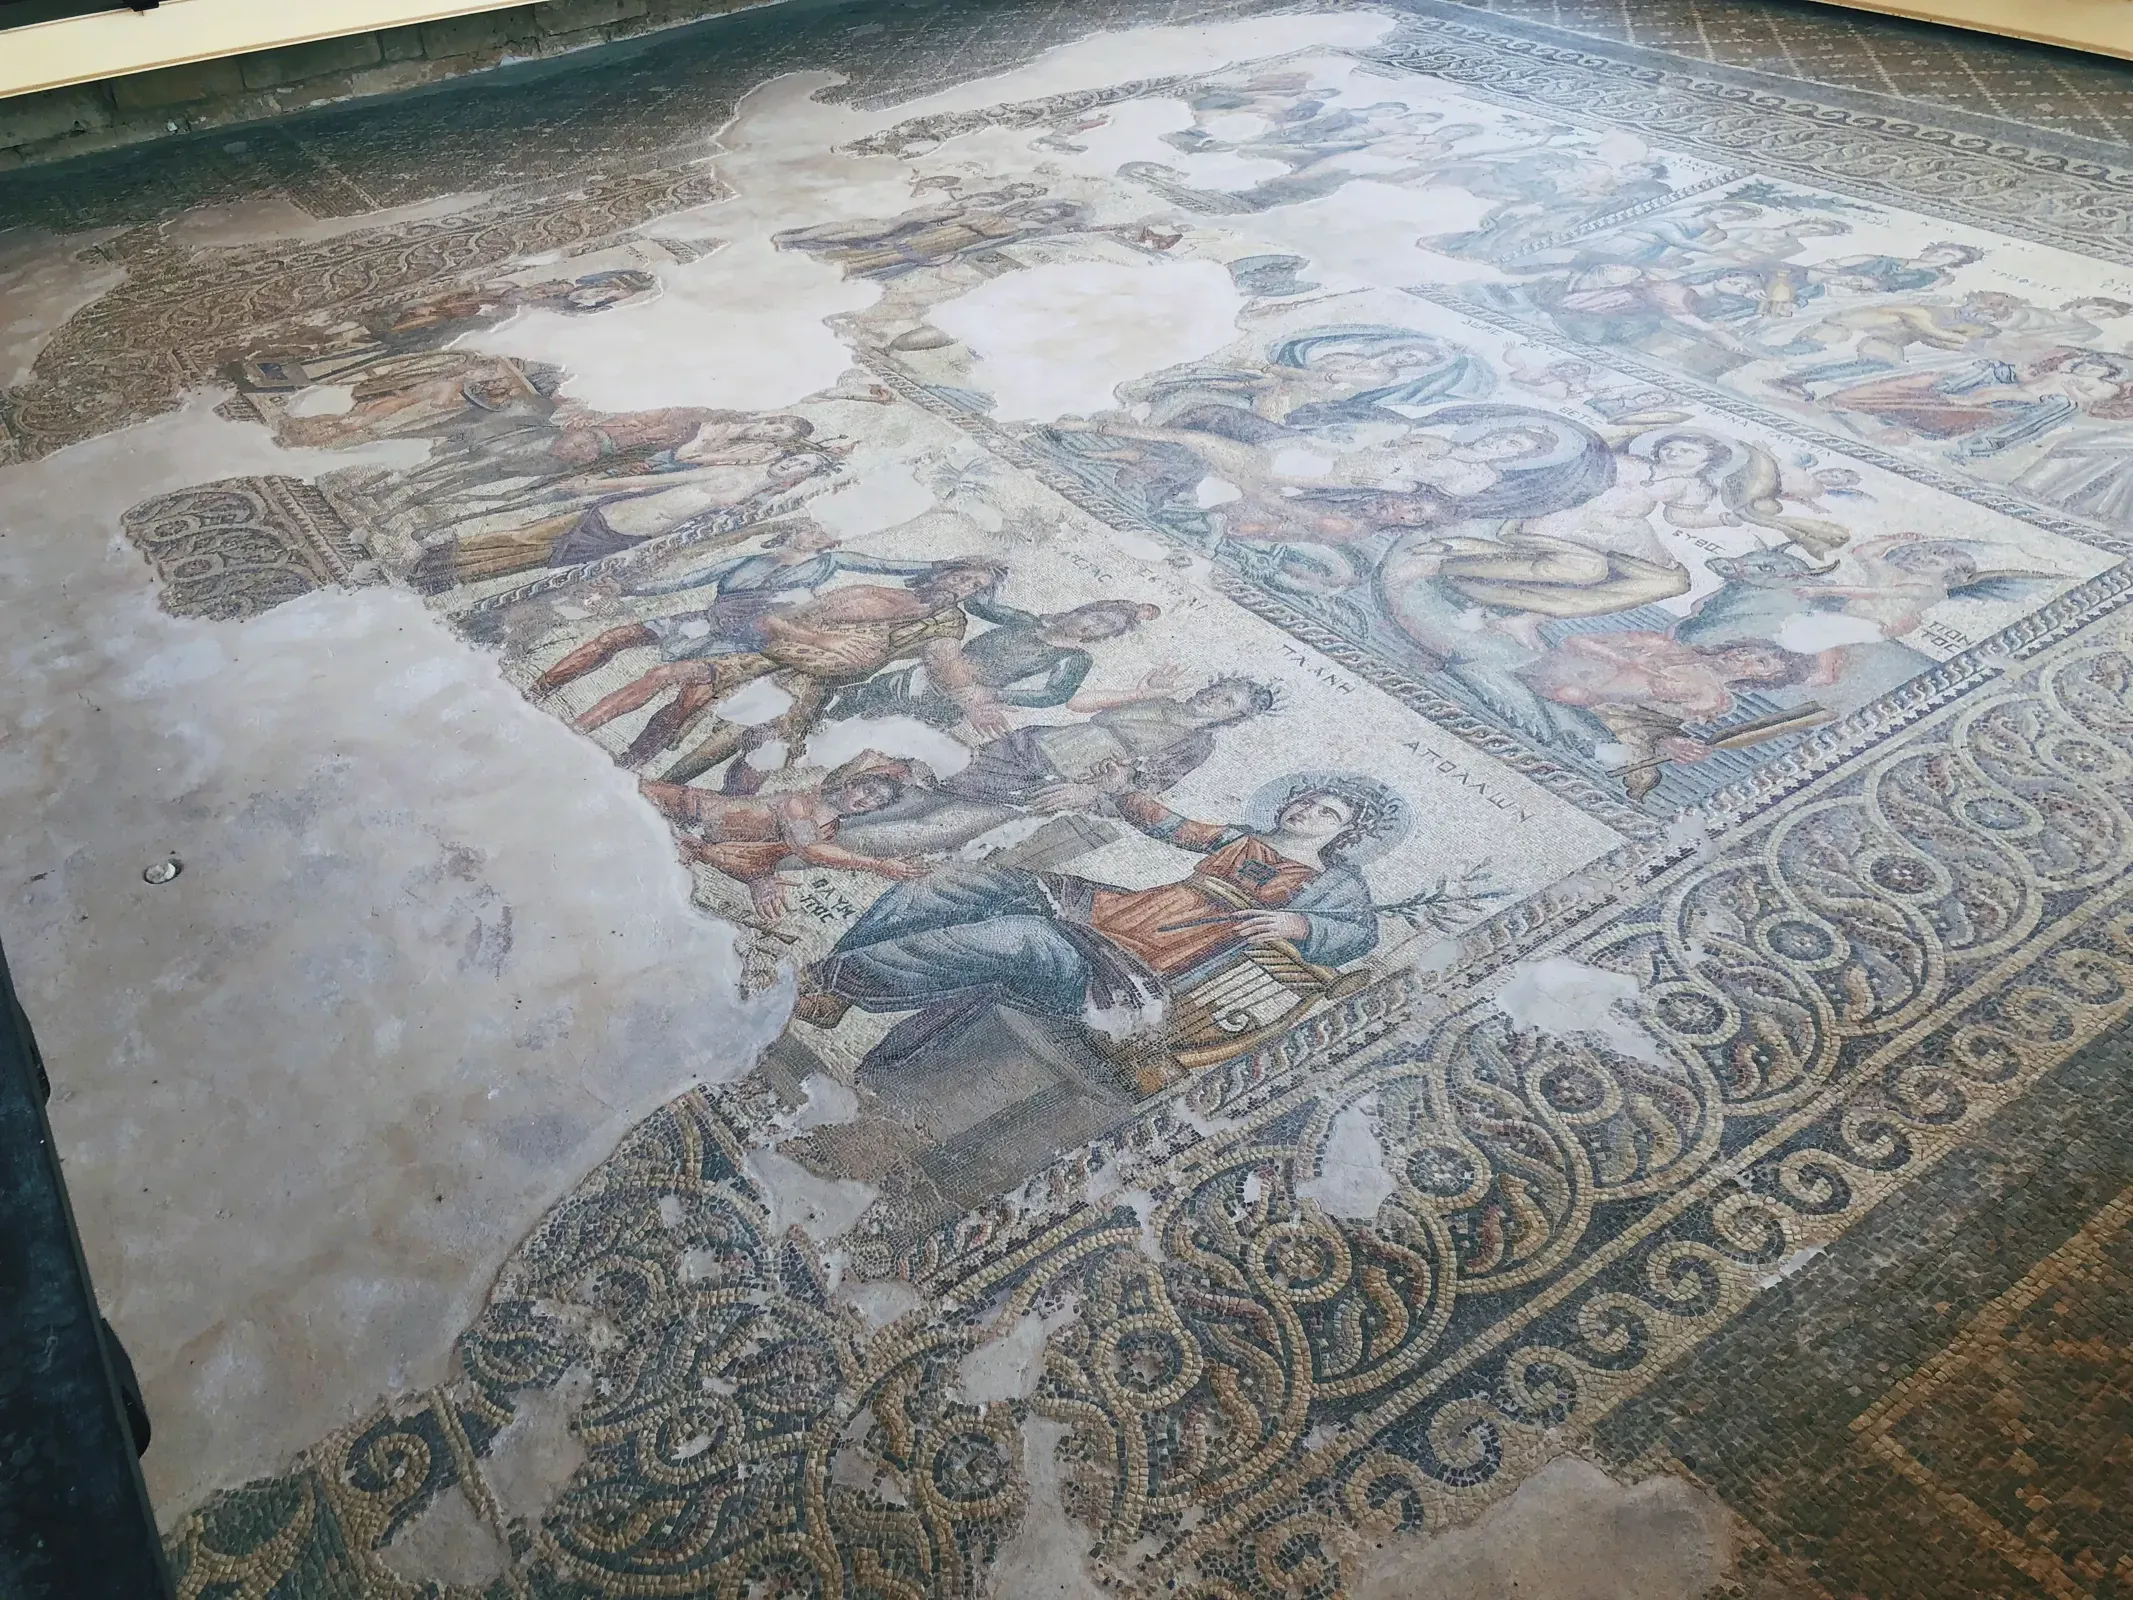 Intricate mosaic floor depicting figures, both humans and animals.